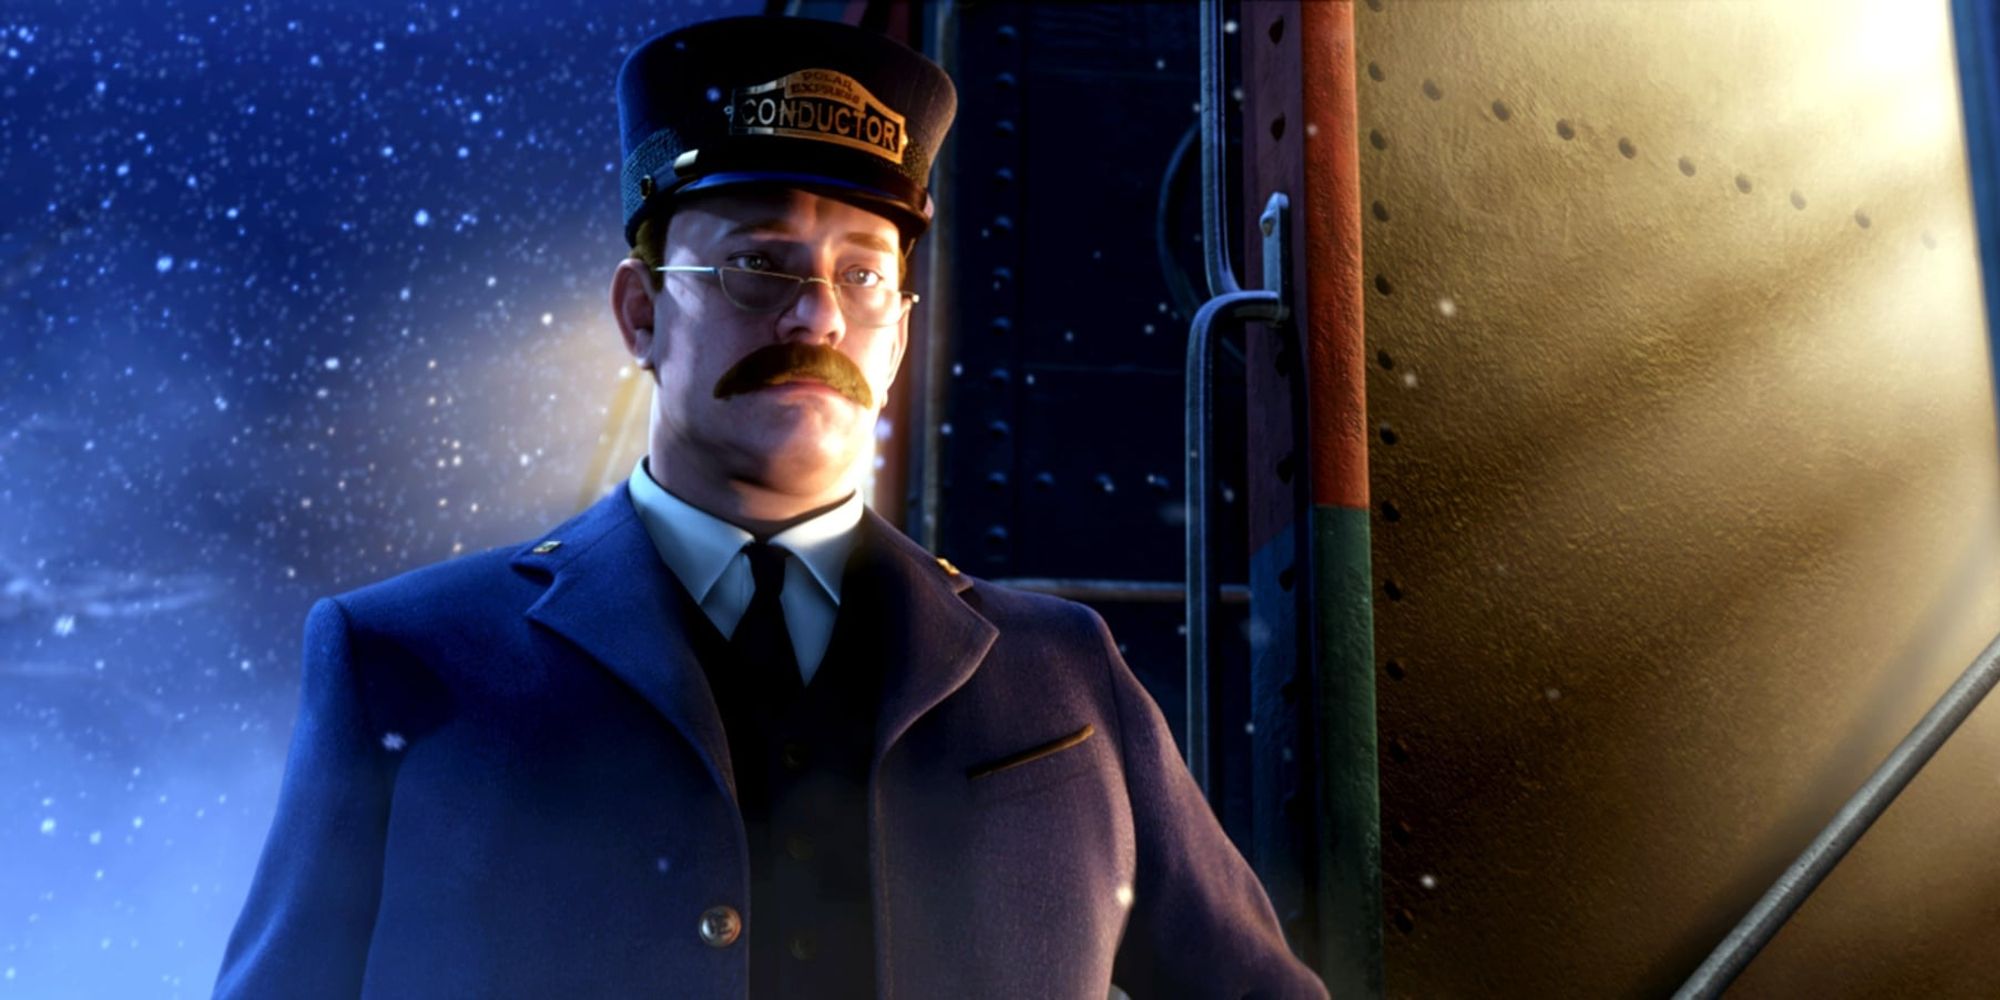 The conductor standing beside the train in The Polar Express (2004)